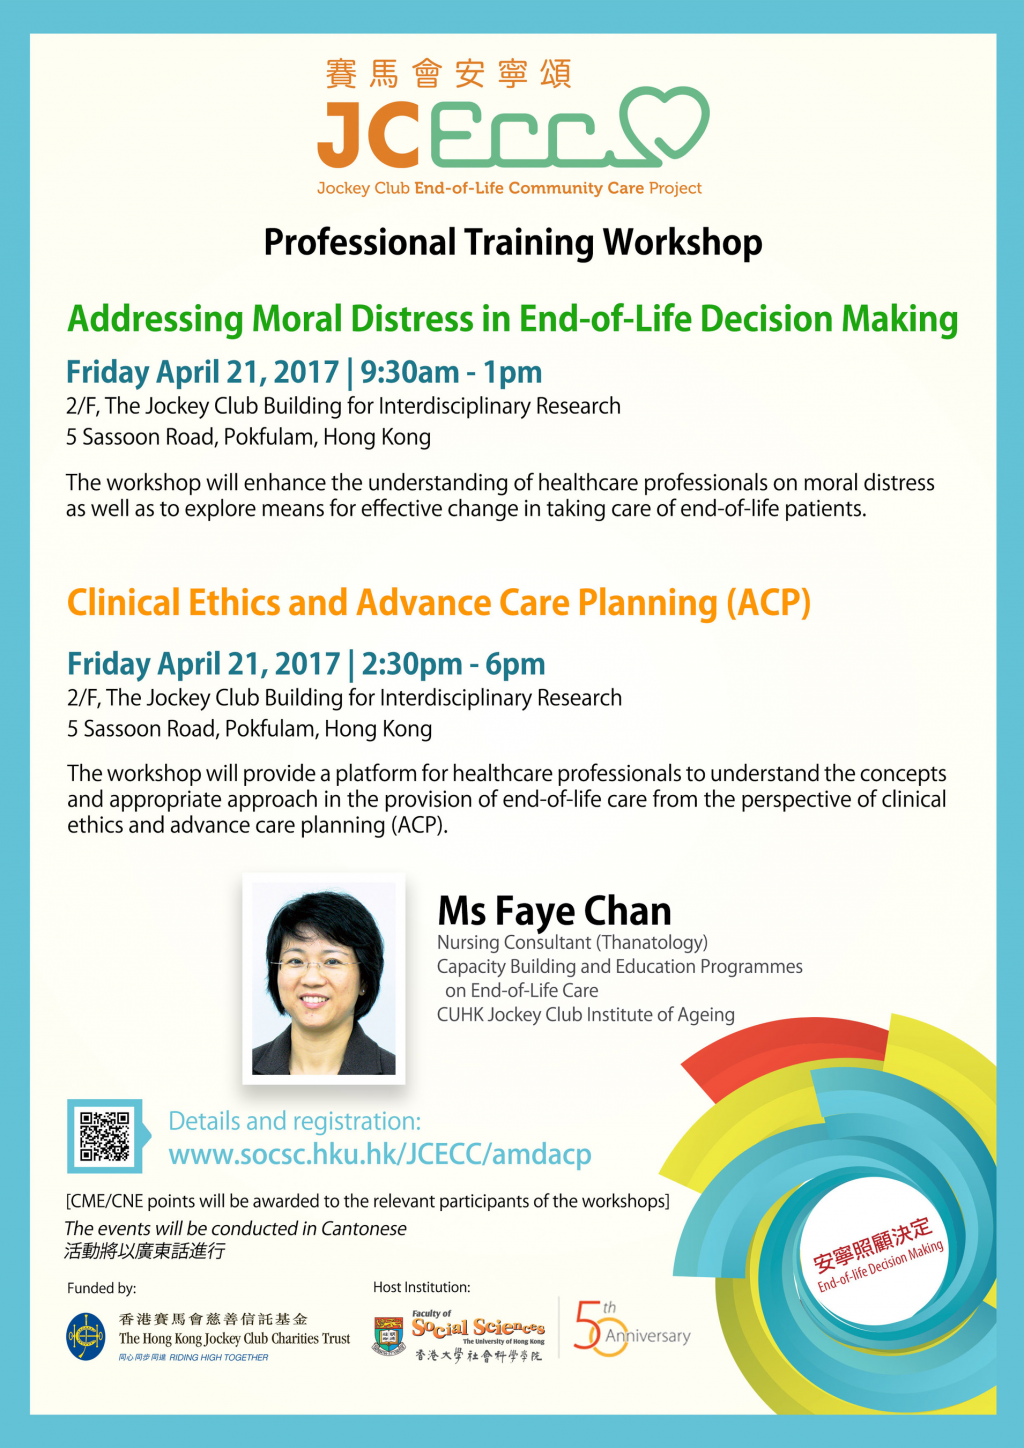 JCECC Workshop on Addressing Moral Distress in End-of-Life Decision Making & Clinical Ethics and Advance Care Planning (ACP)